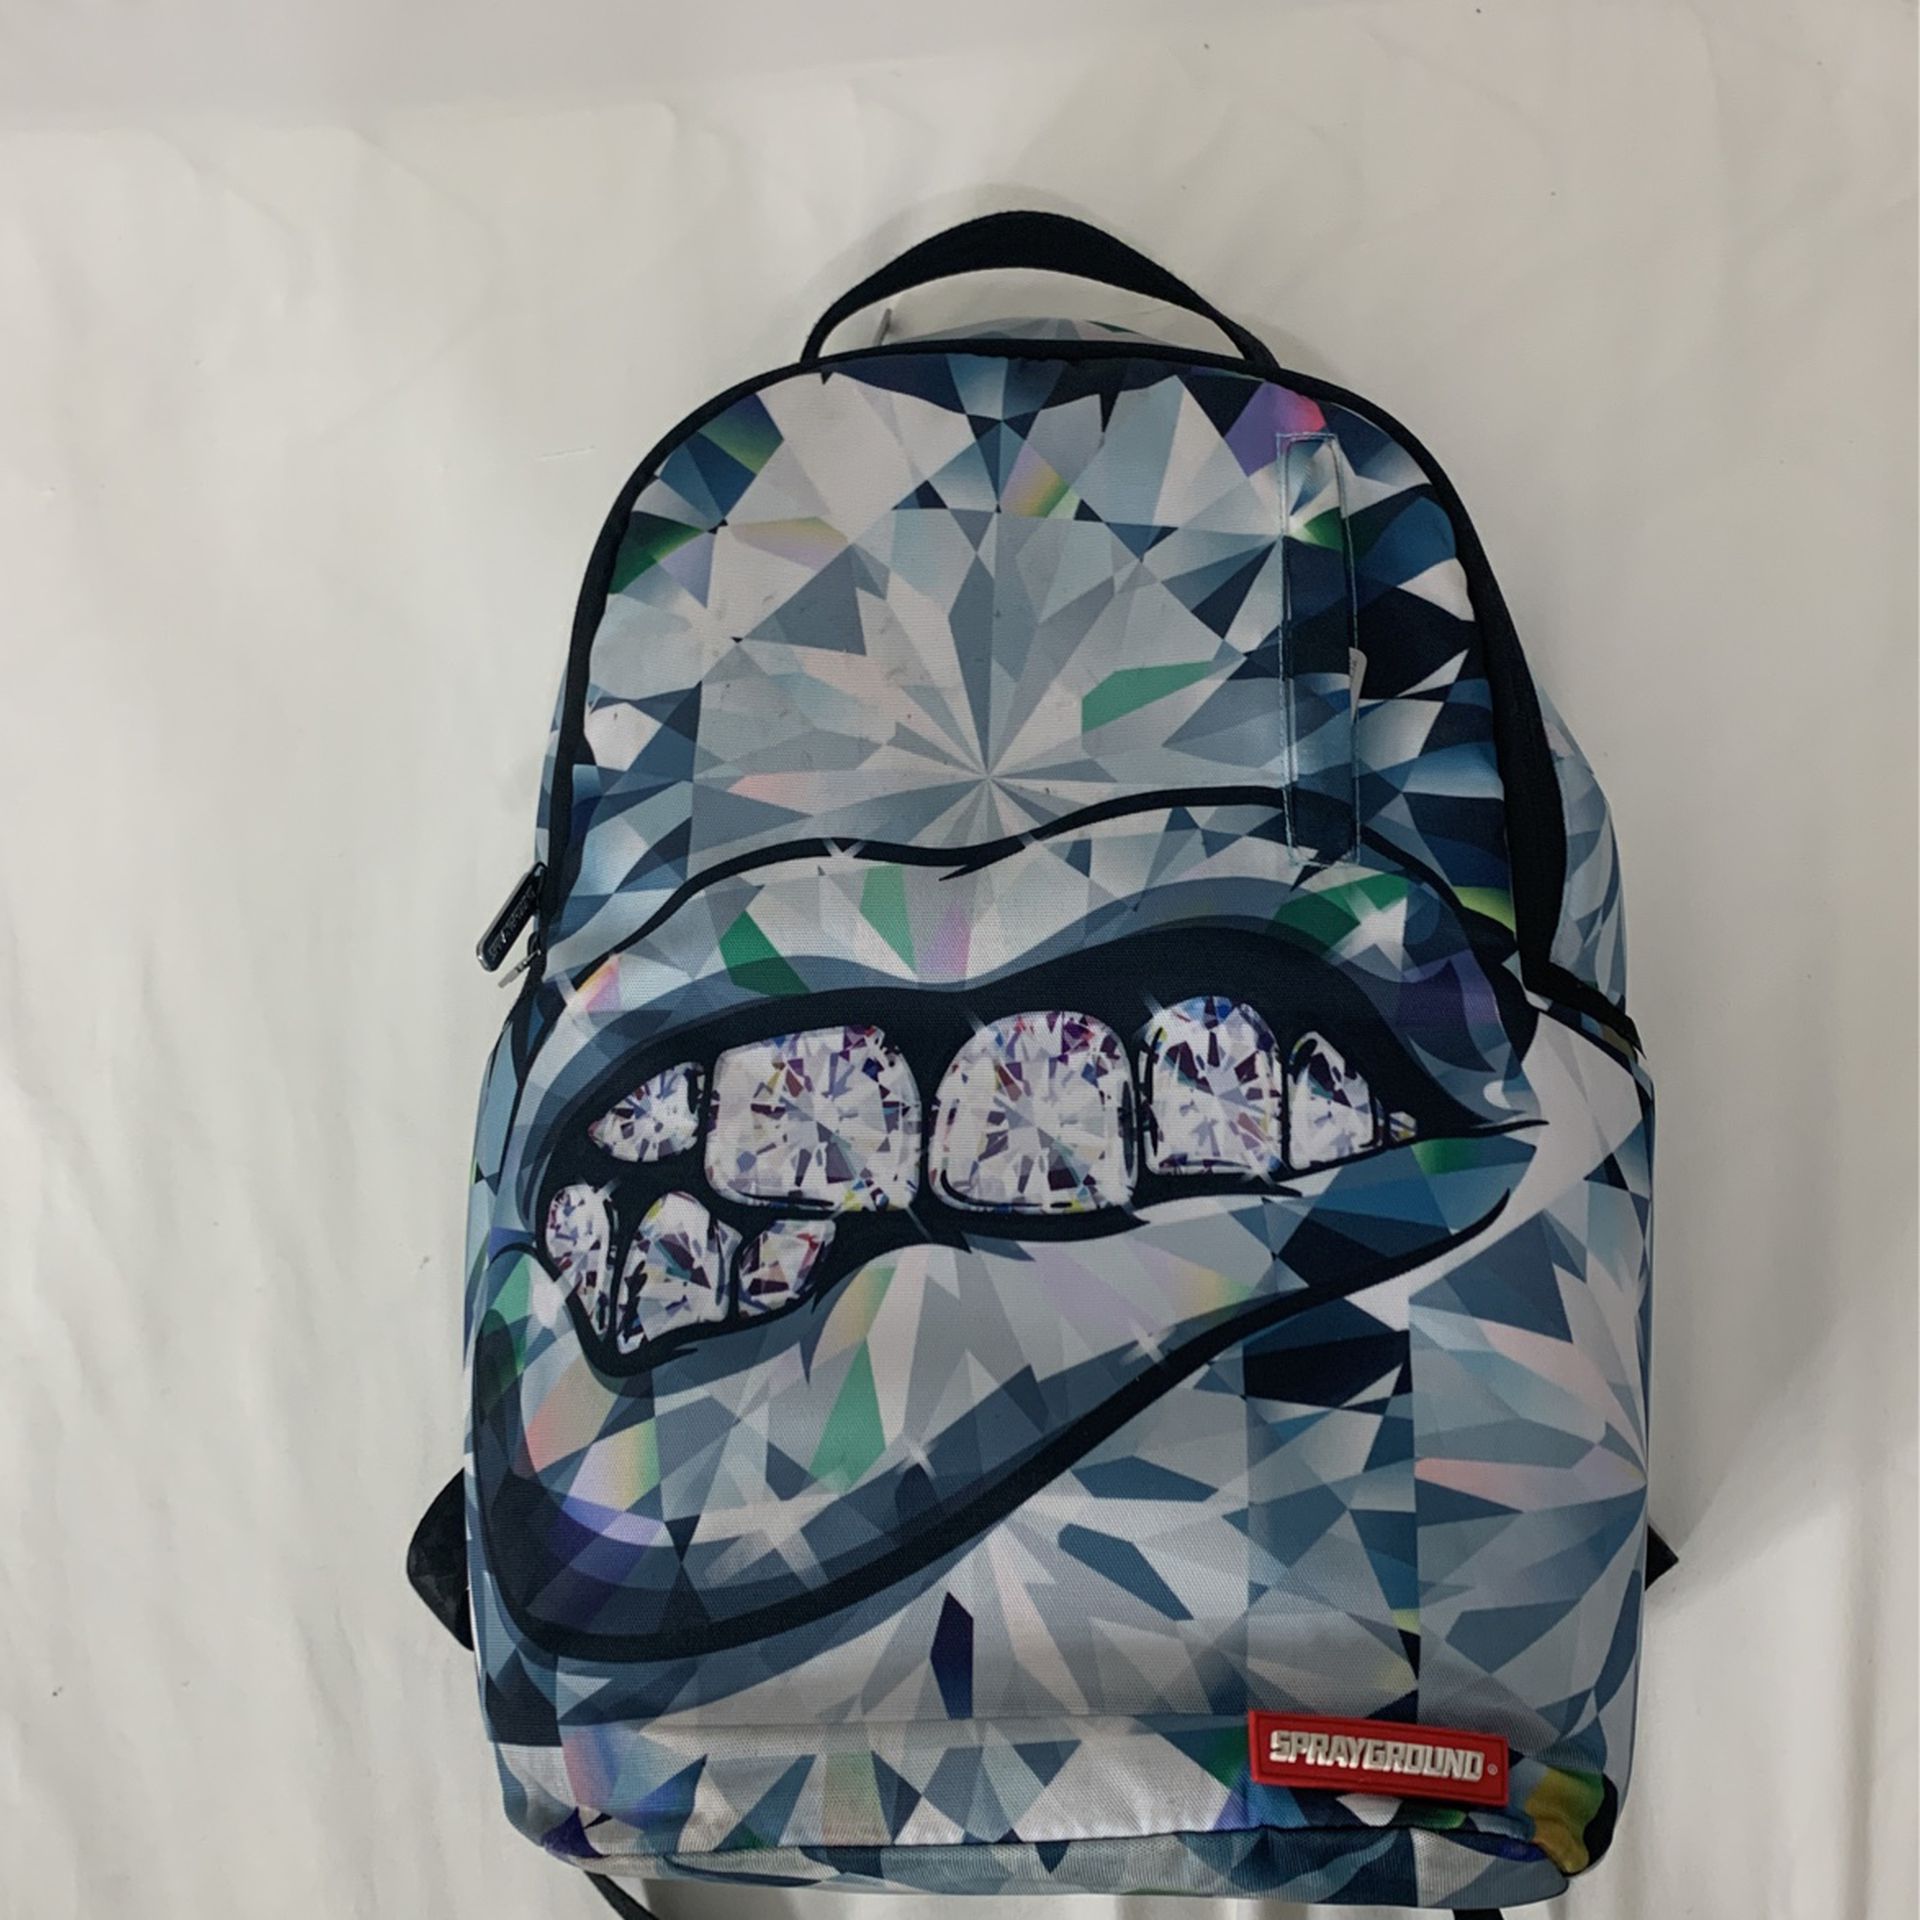 Sprayground “Spensive” Backpack for Sale in Fort Myers, FL - OfferUp